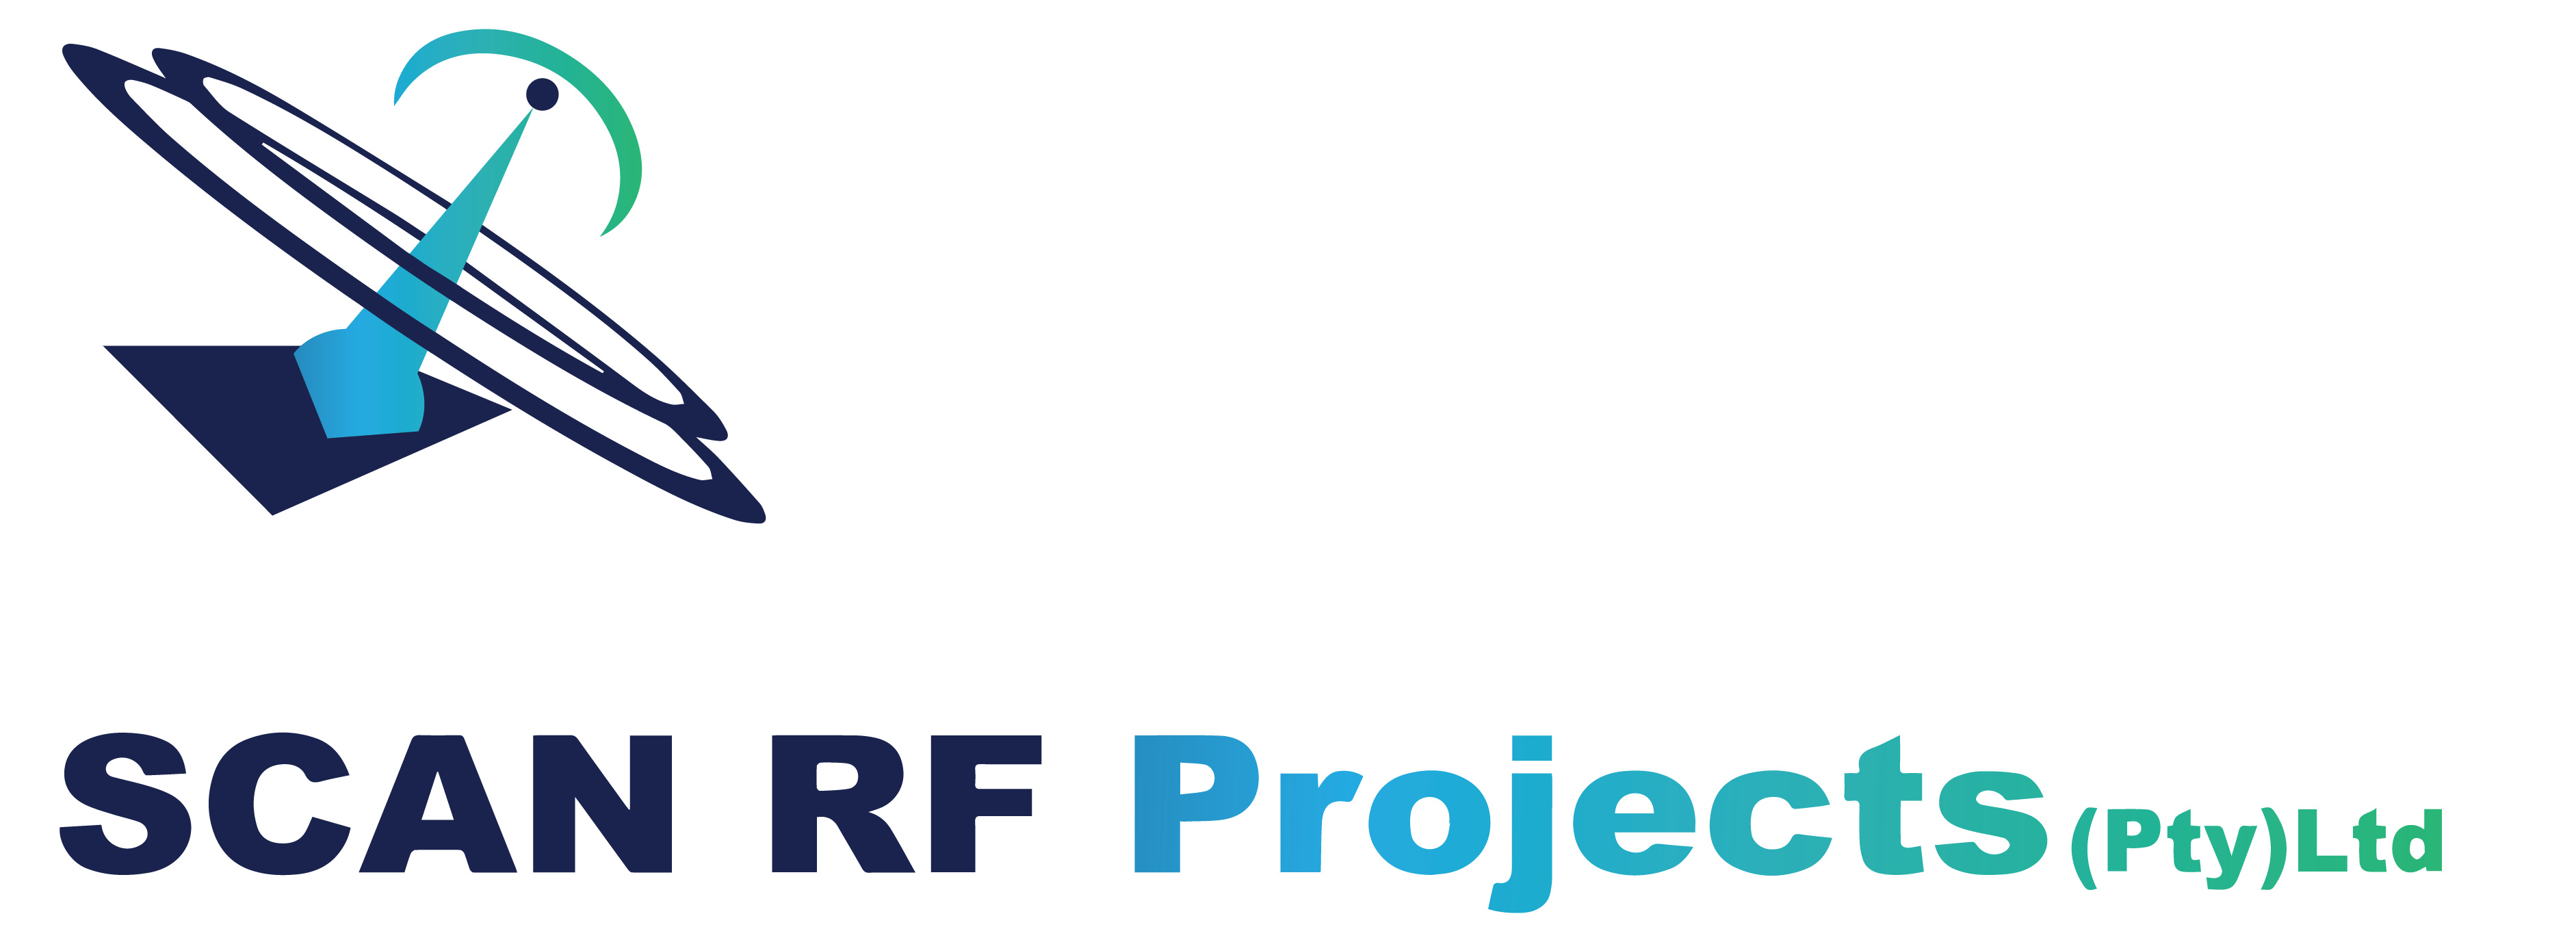 Scan RF Projects